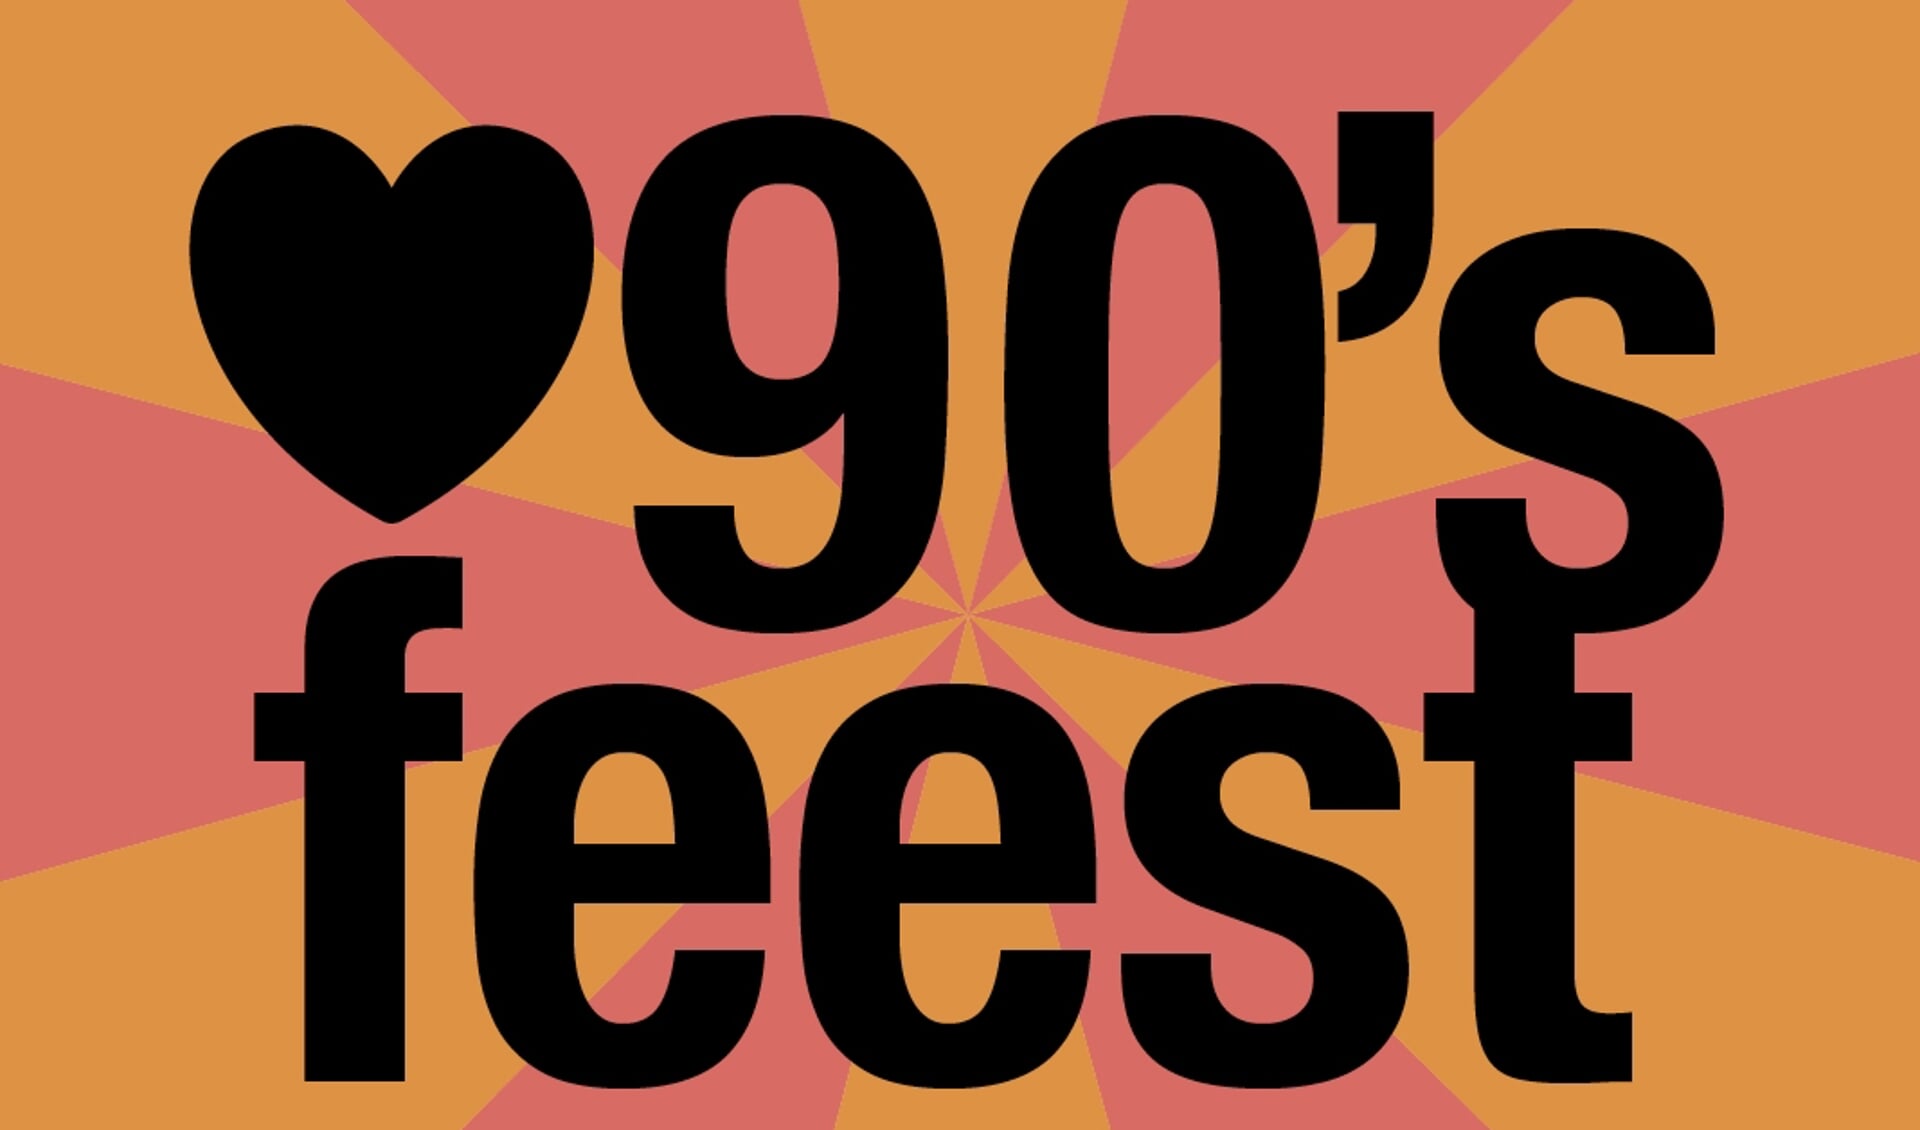 Wesopa loves 90's feest